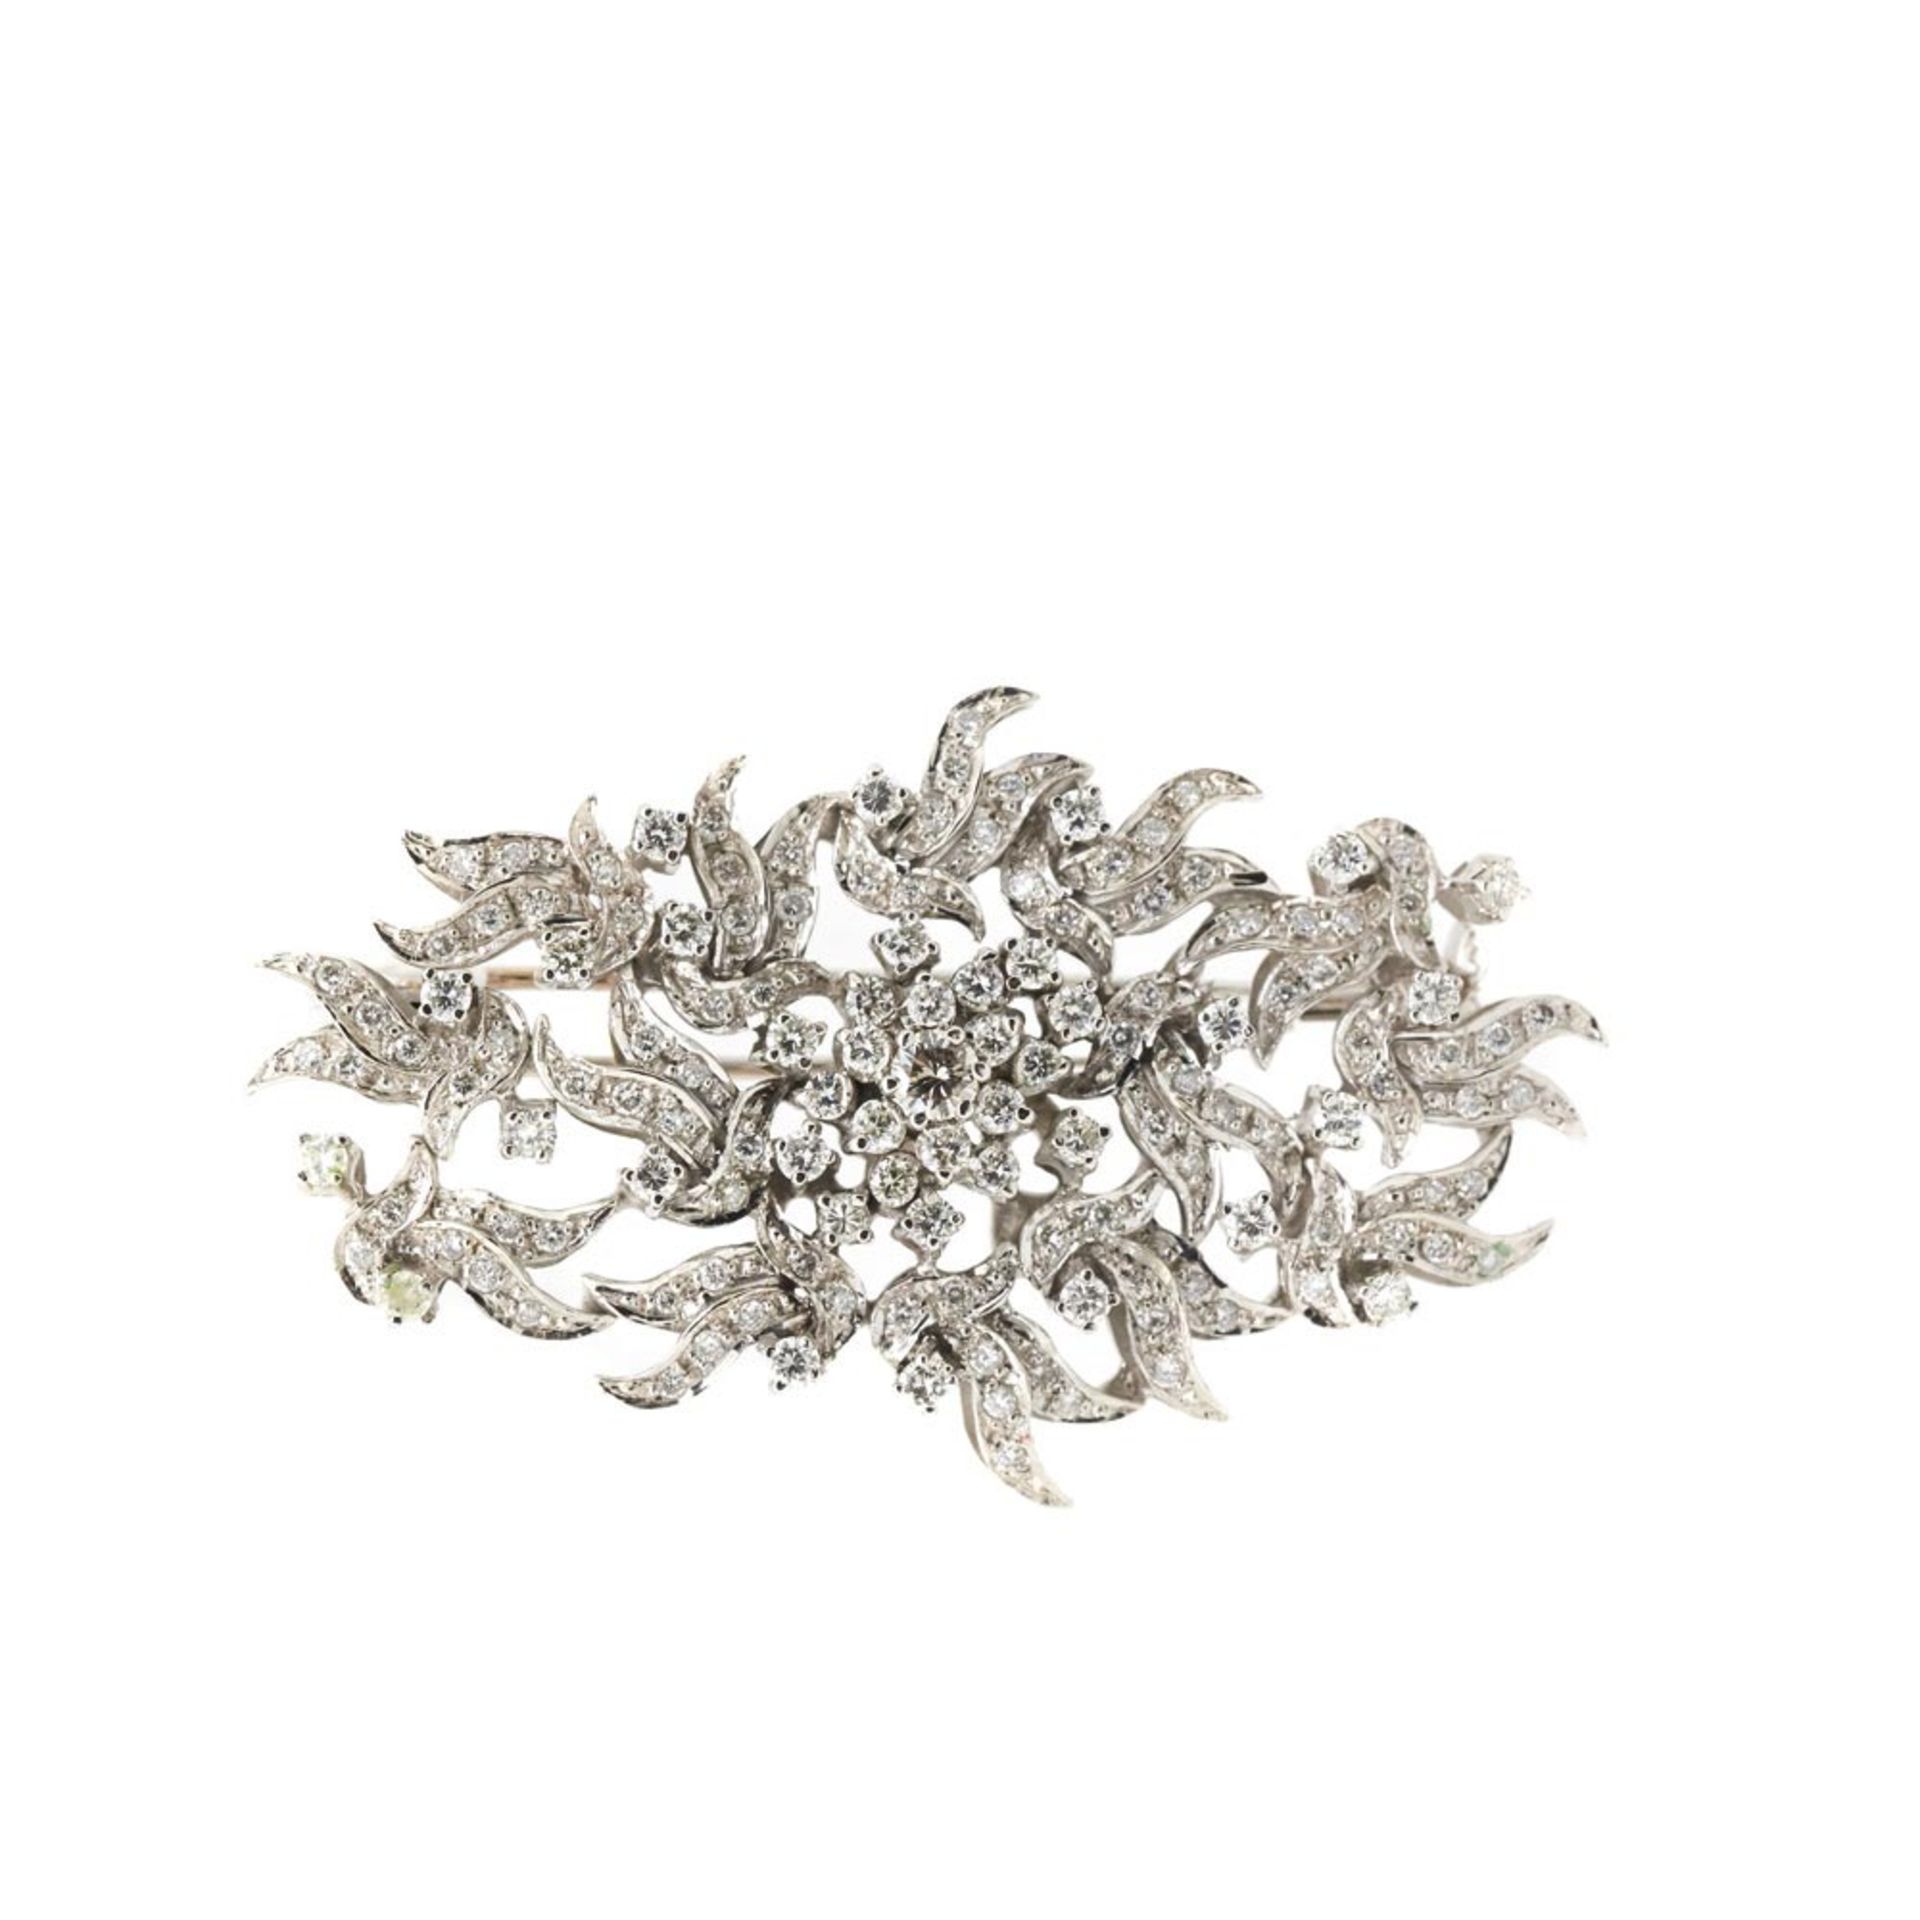 White gold and diamonds brooch